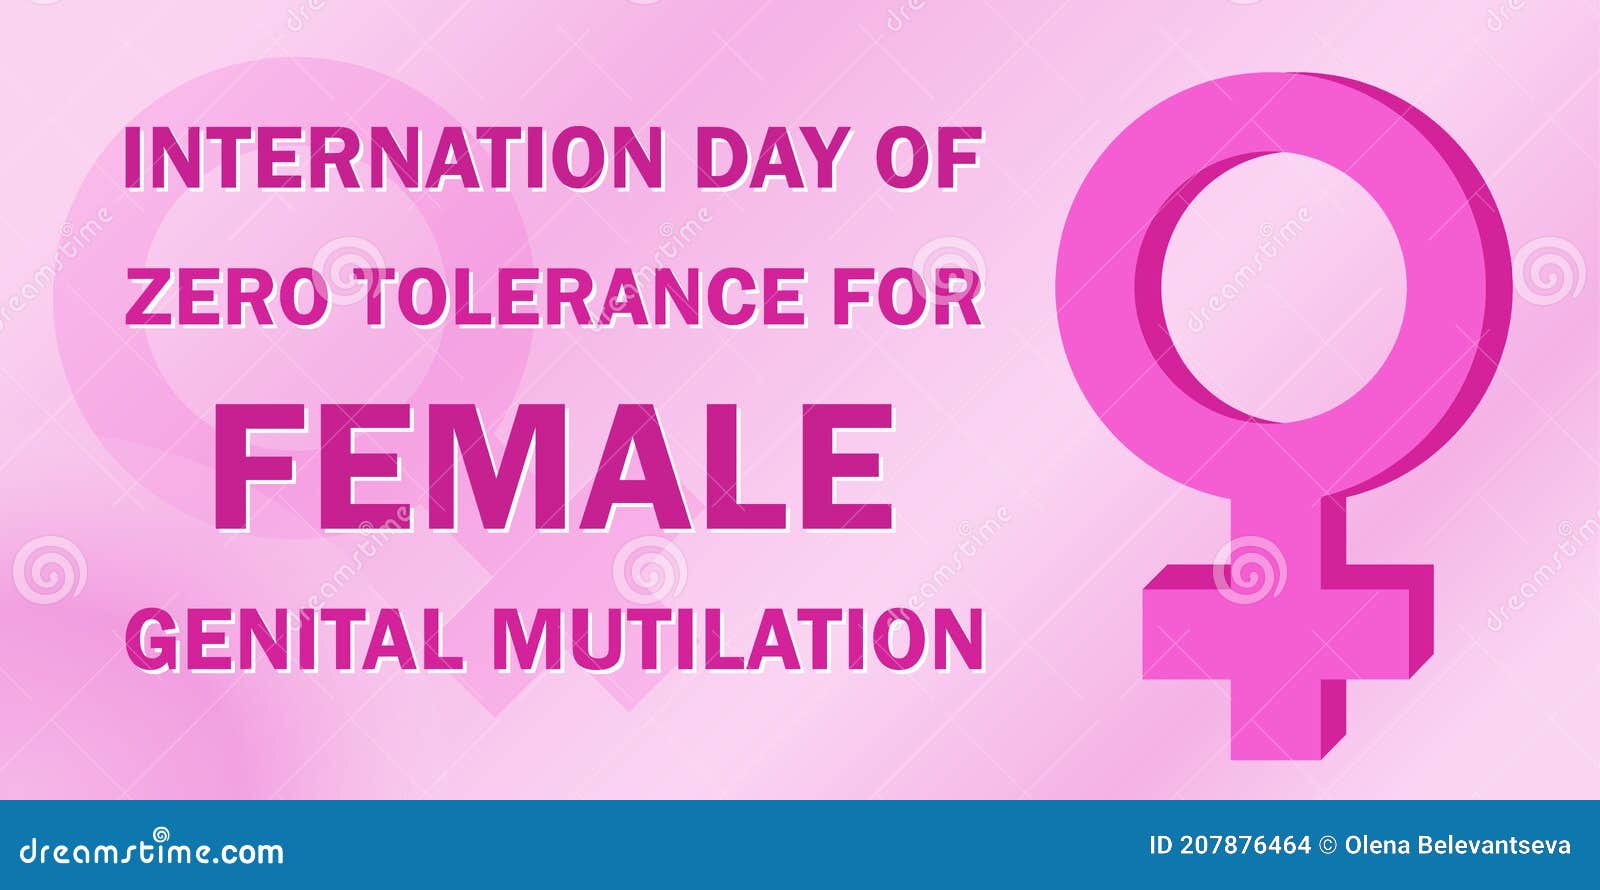 the international day of zero tolerance to female genital mutilation is celebrated annually on 6 february to raise awareness of